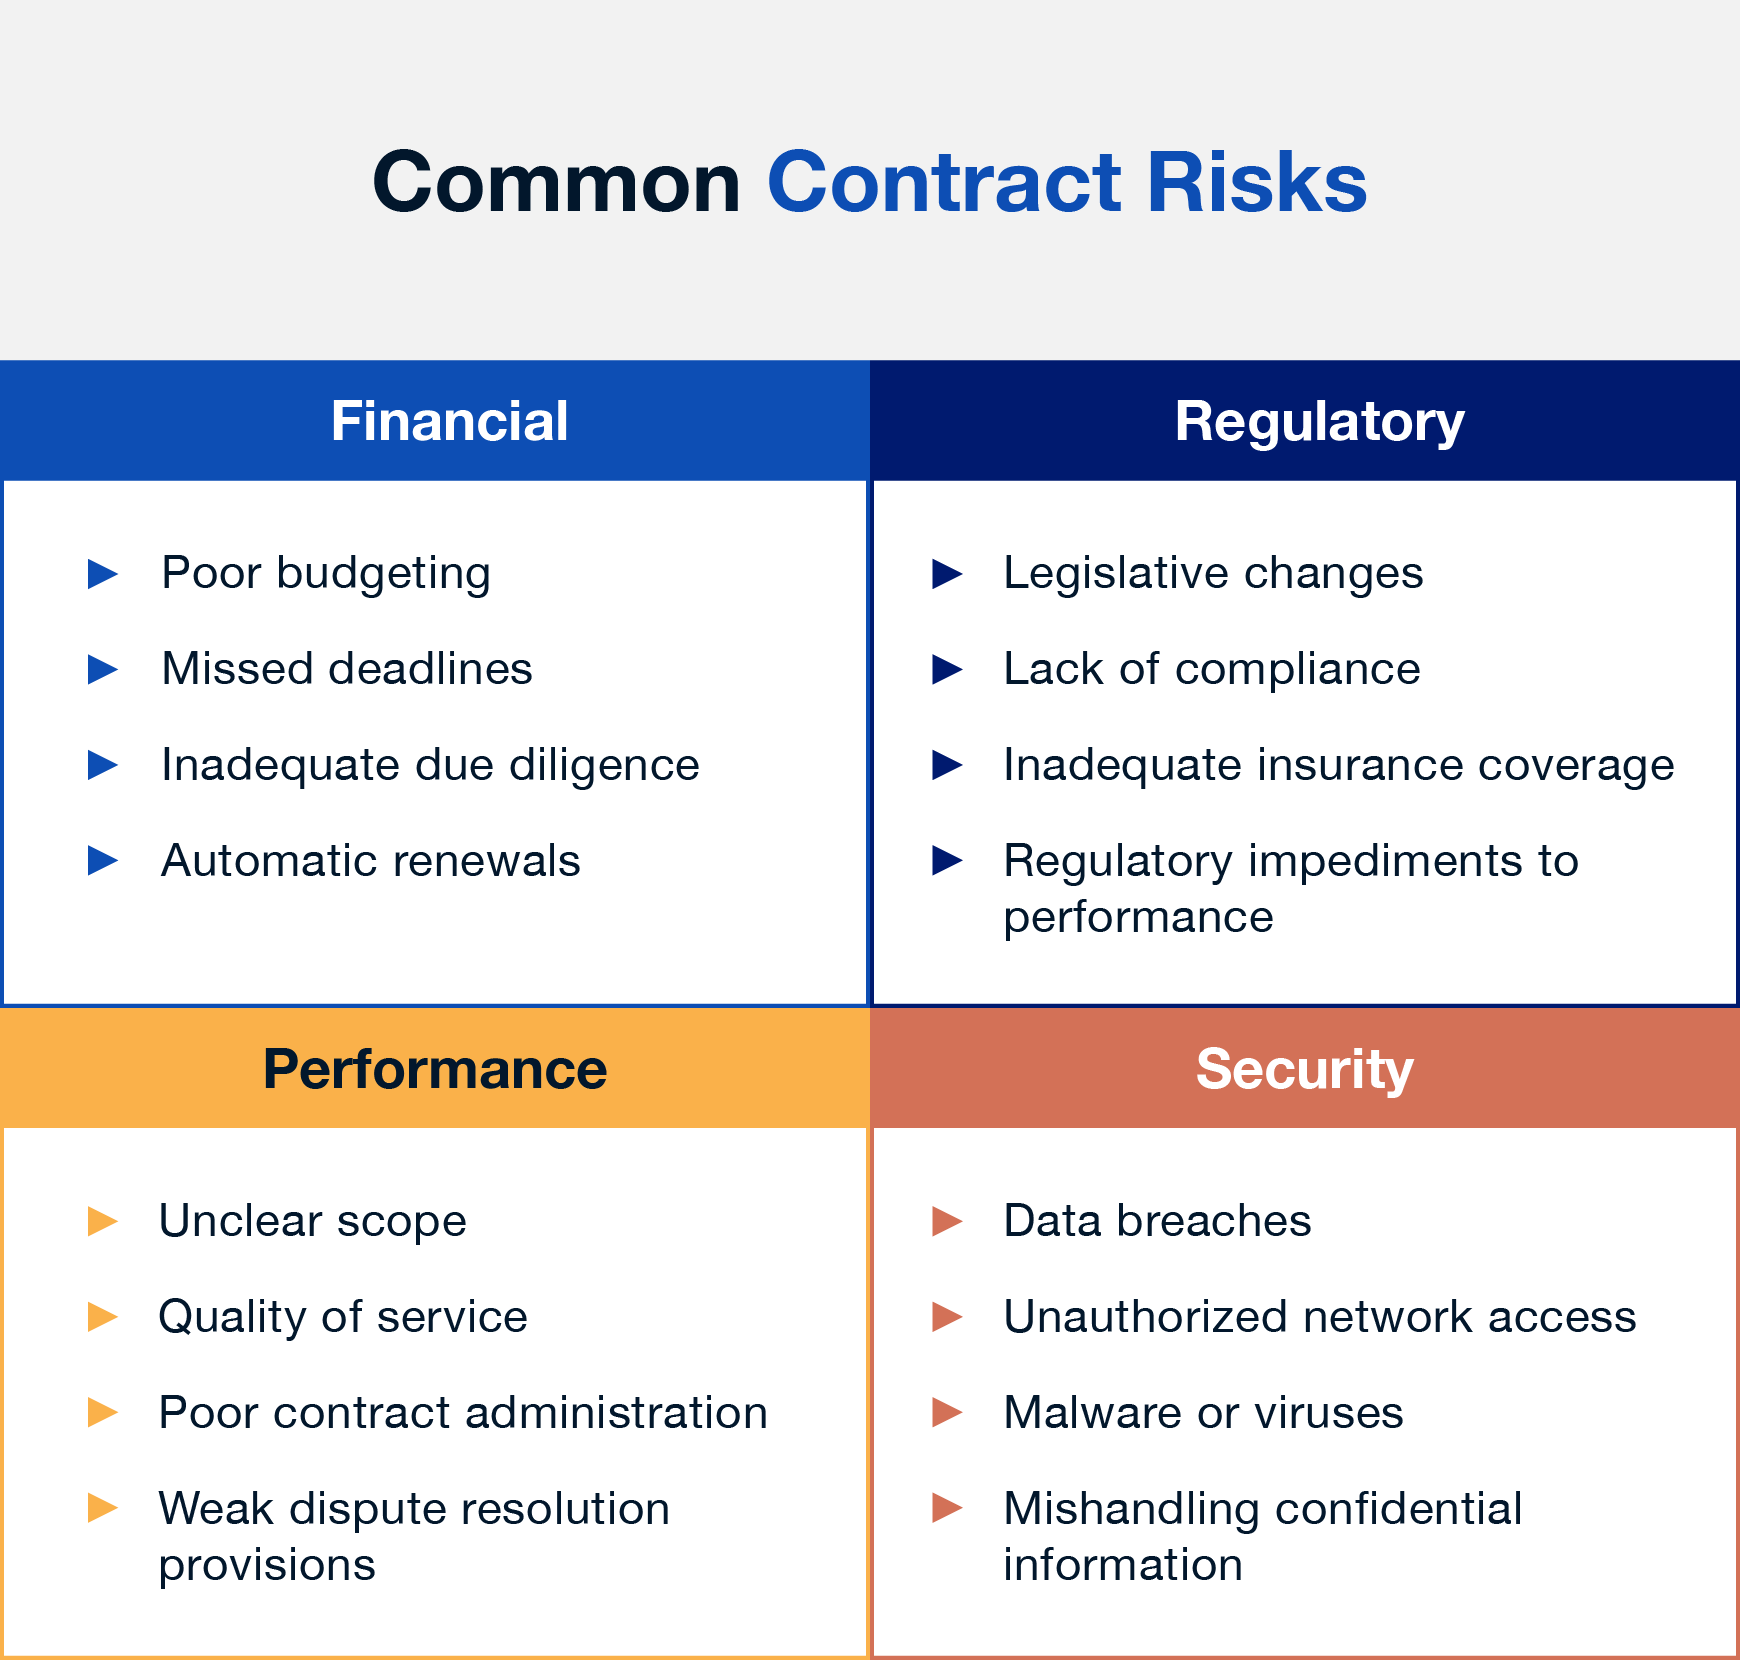 Types of financial, regulatory, performance, and security contract risks